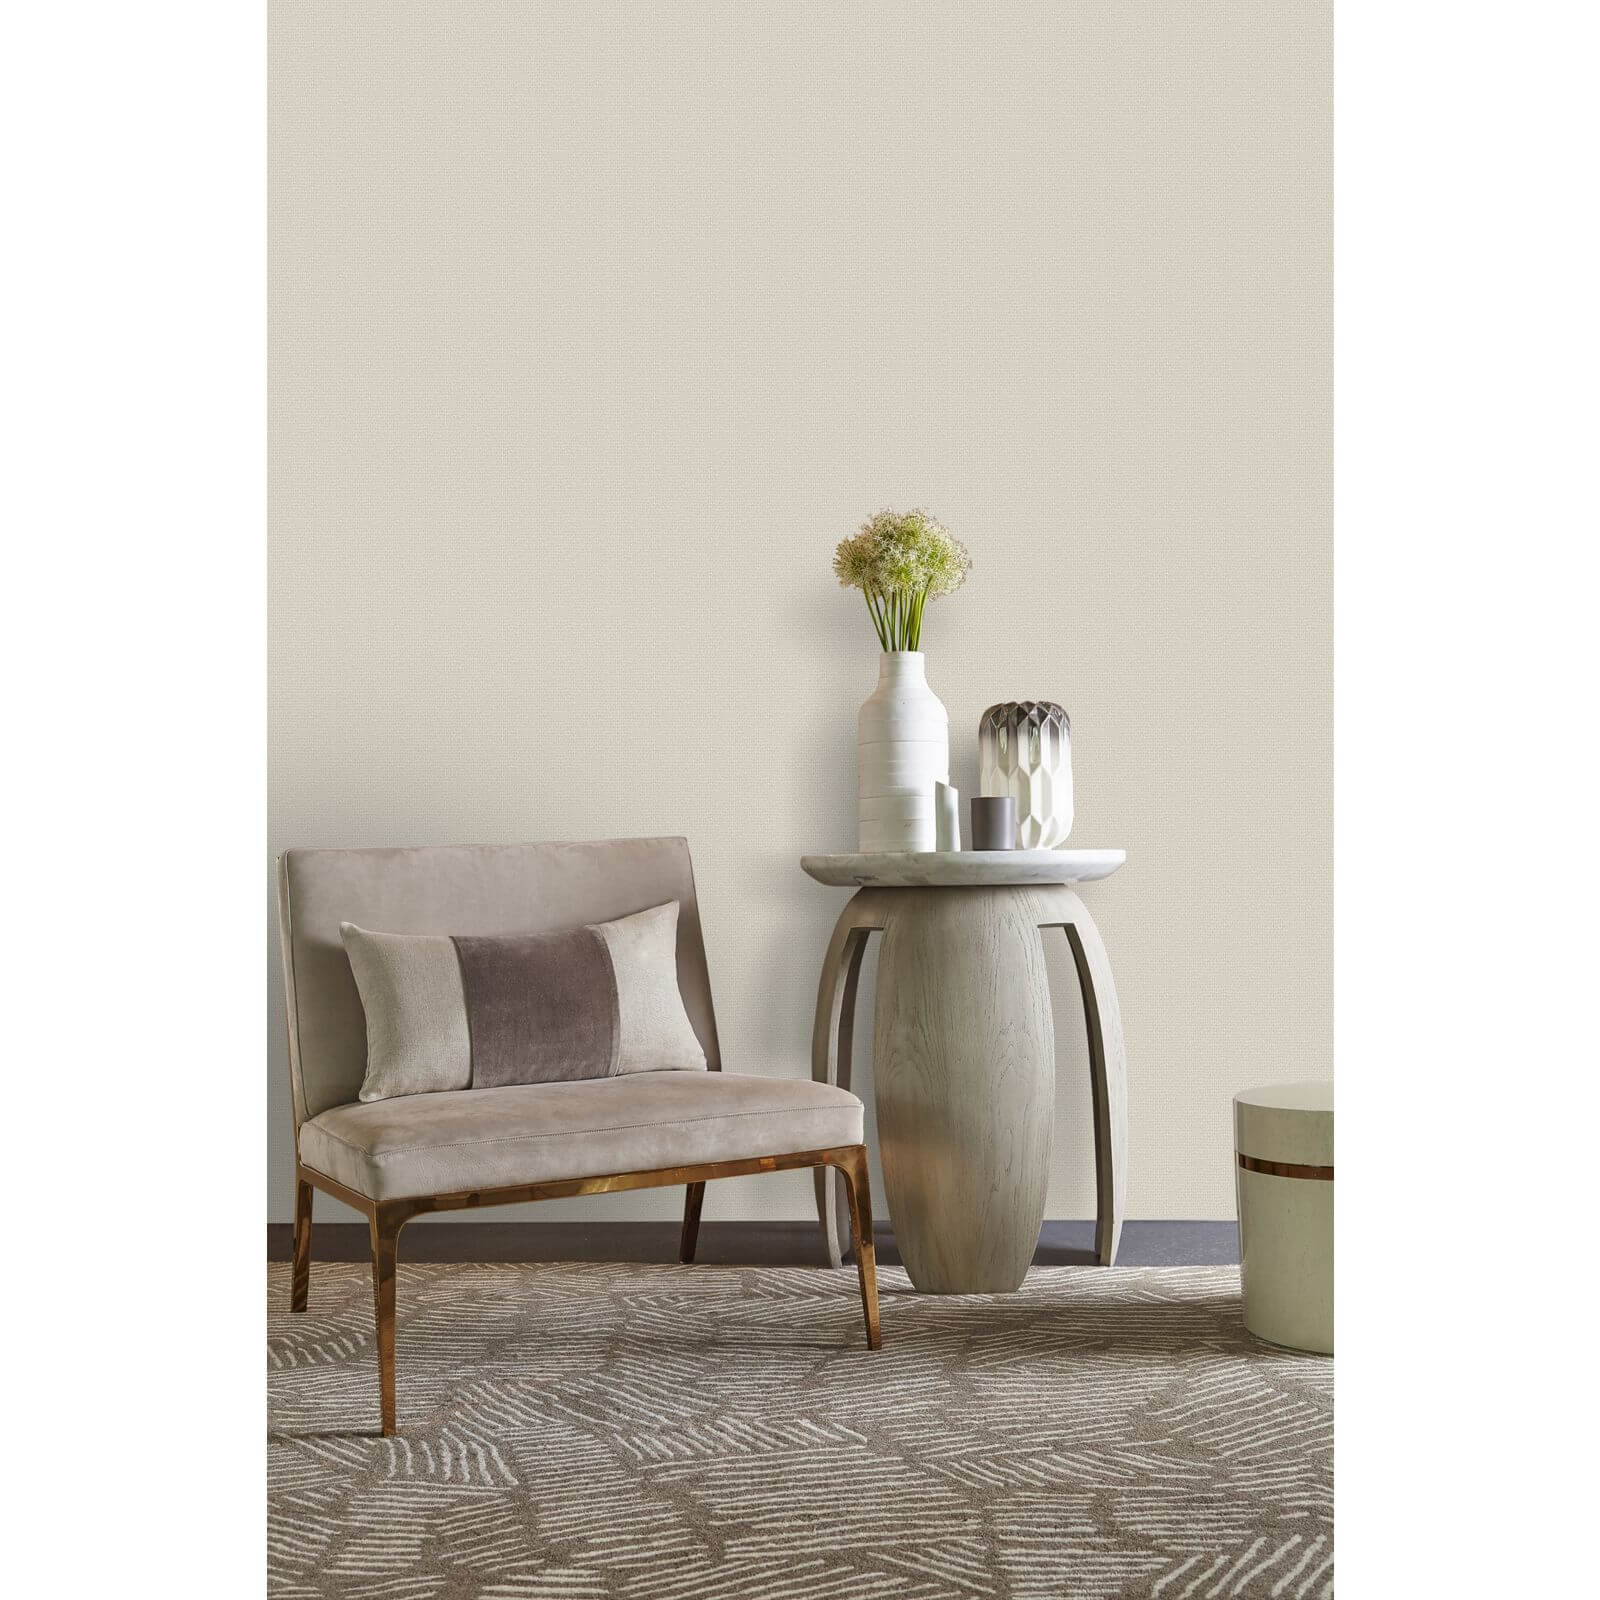 Kelly Hoppen Weave Paste the Wall Natural Wallpaper